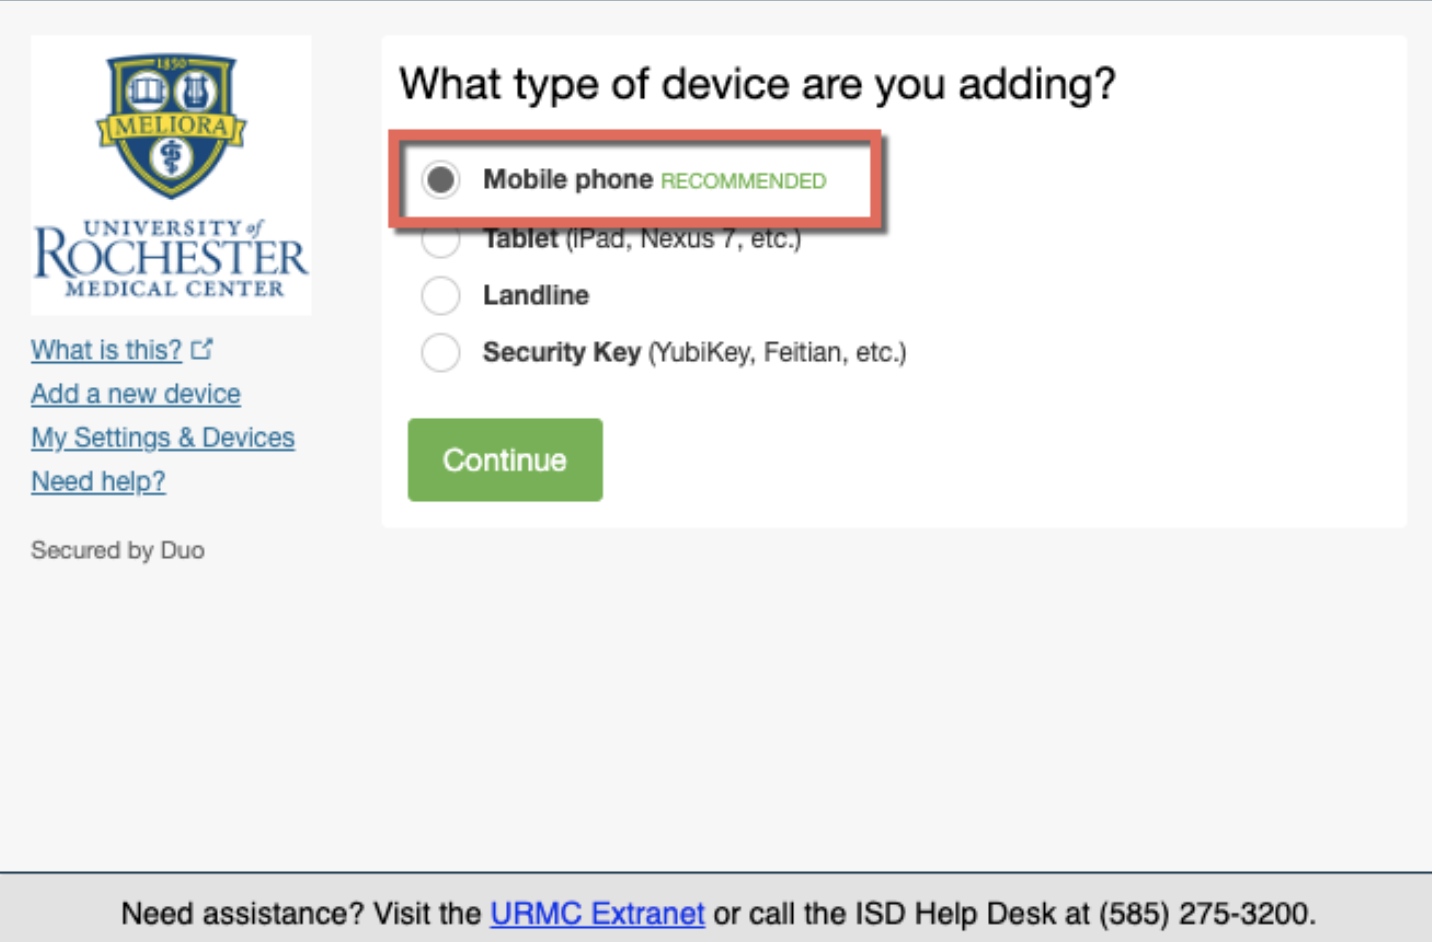 How to find out the device with an IP address assigned by the DHCP server  in UDM-Pro?